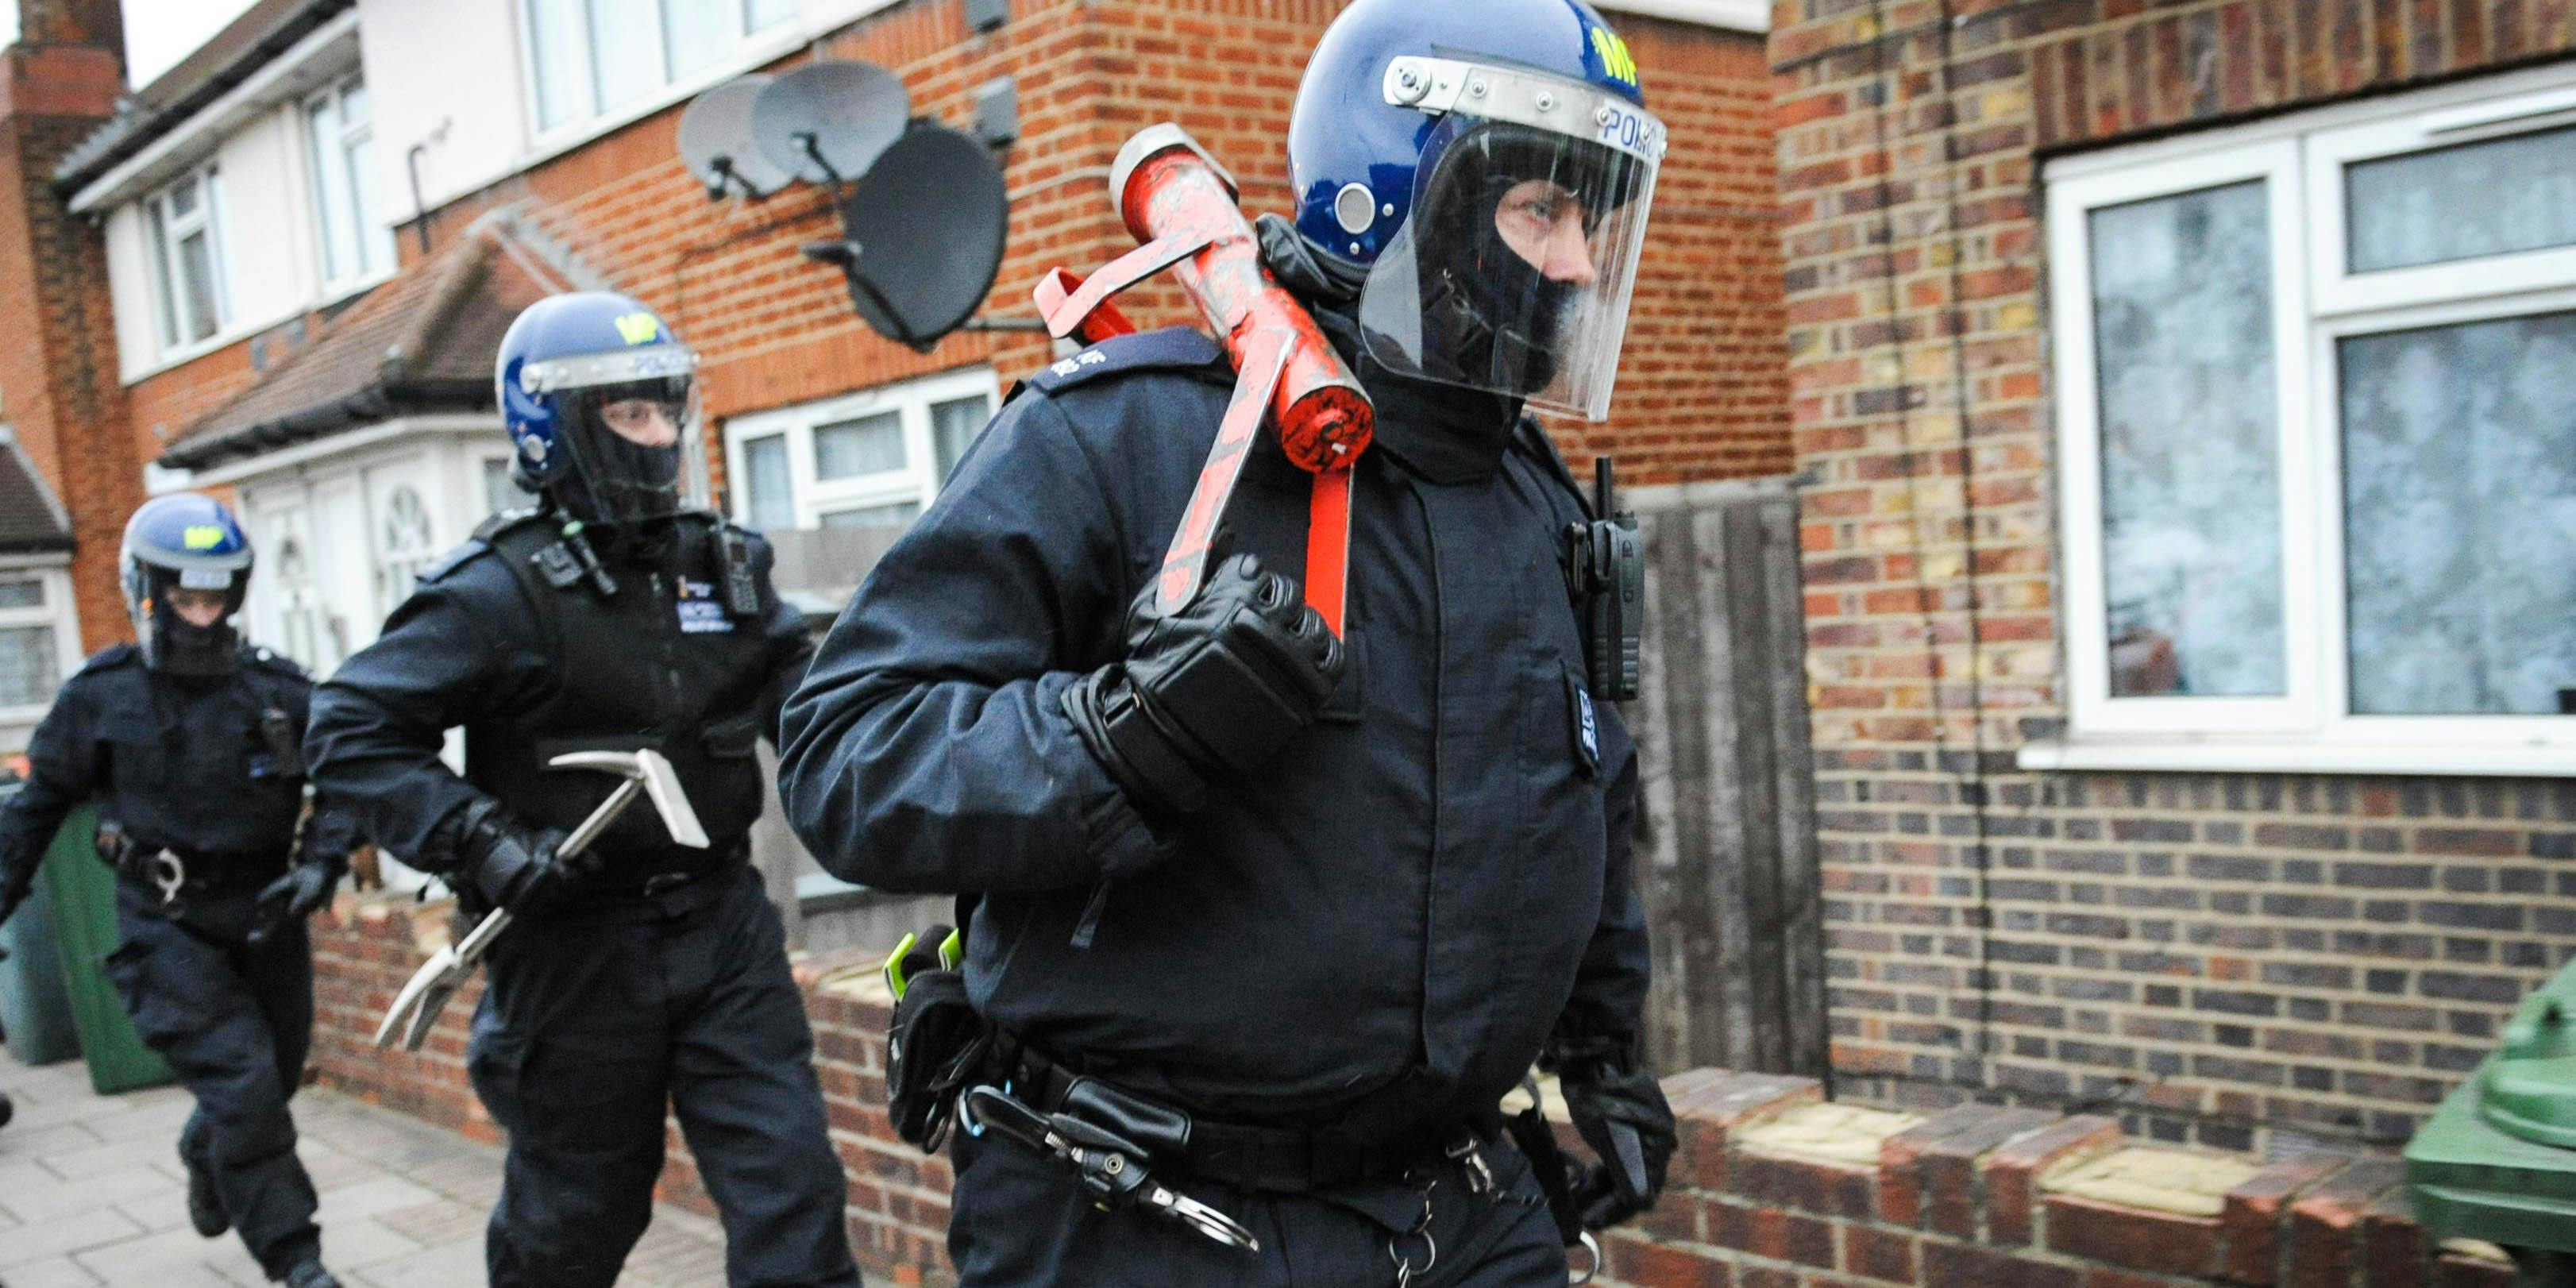 UK Police Leader Simon Kempton Says The Middle Class, Not The Poor, Fund UK's Drug Gangs